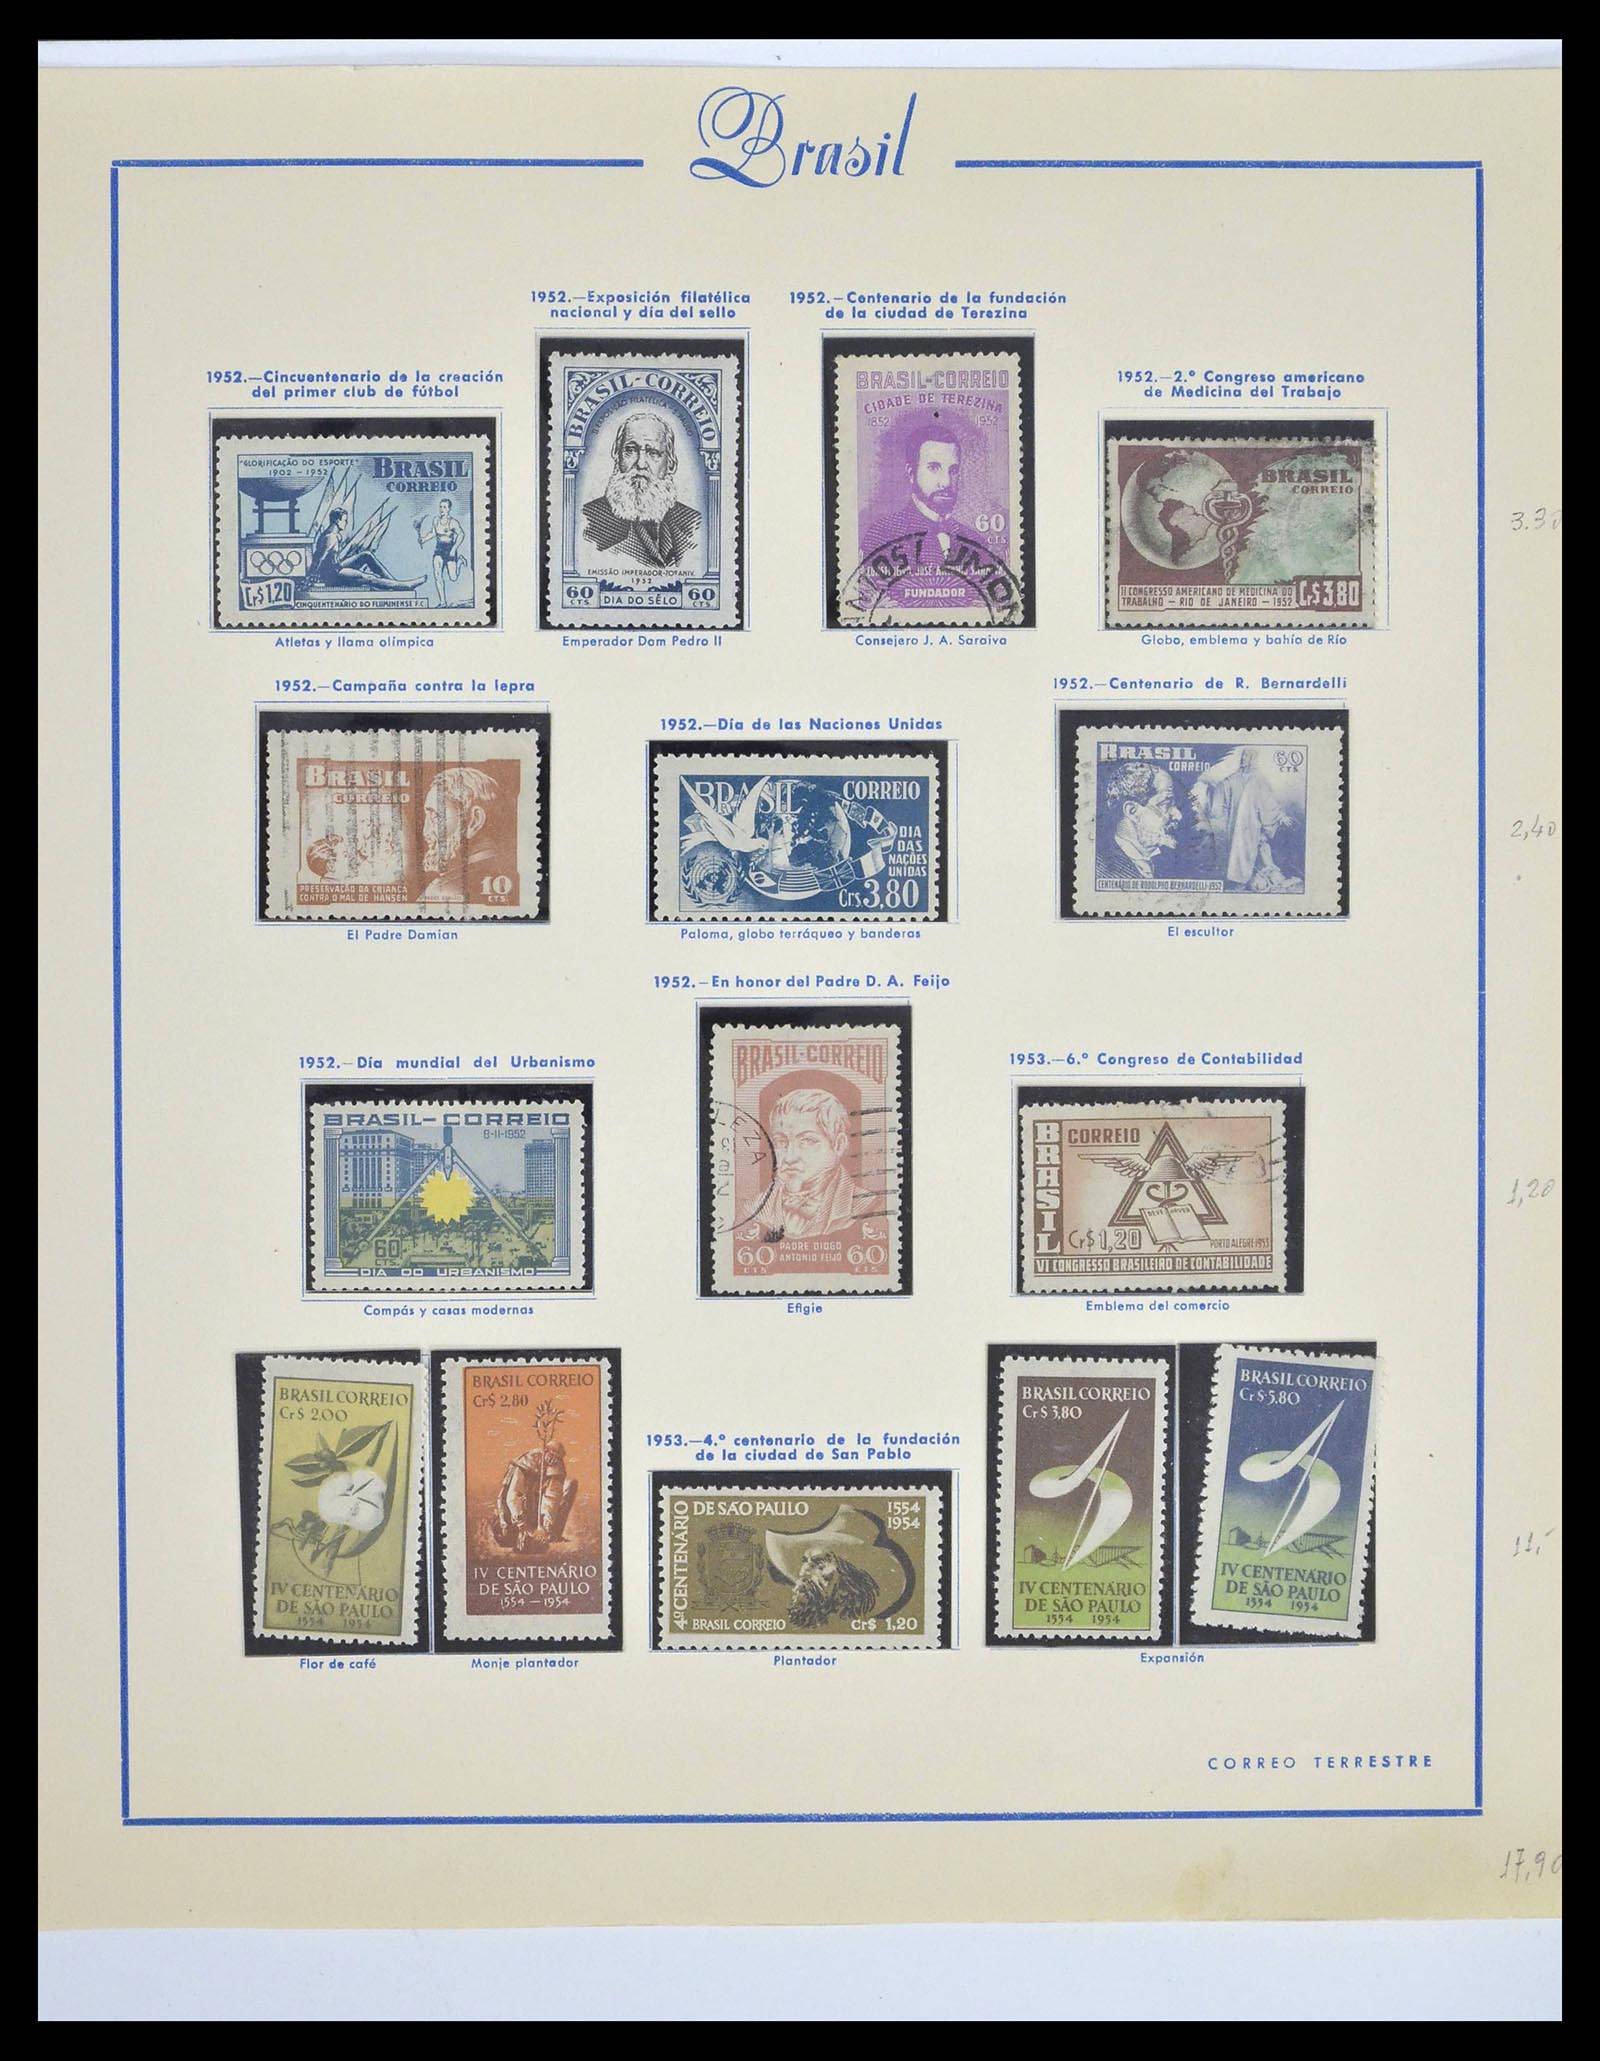 39245 0032 - Stamp collection 39245 Brazil 1843-1968.